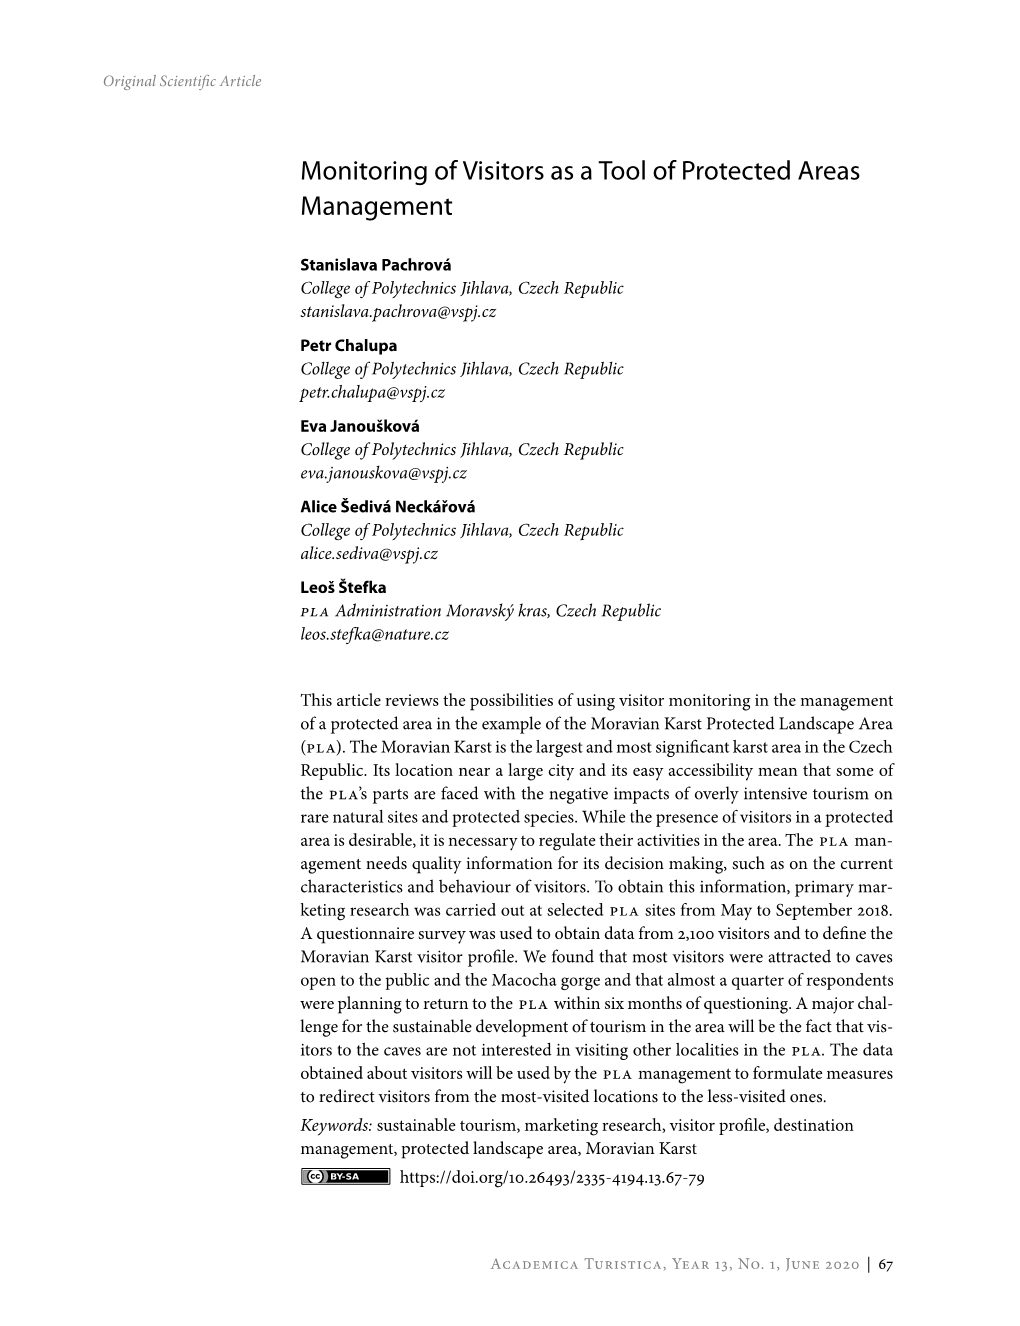 Monitoring of Visitors As a Tool of Protected Areas Management